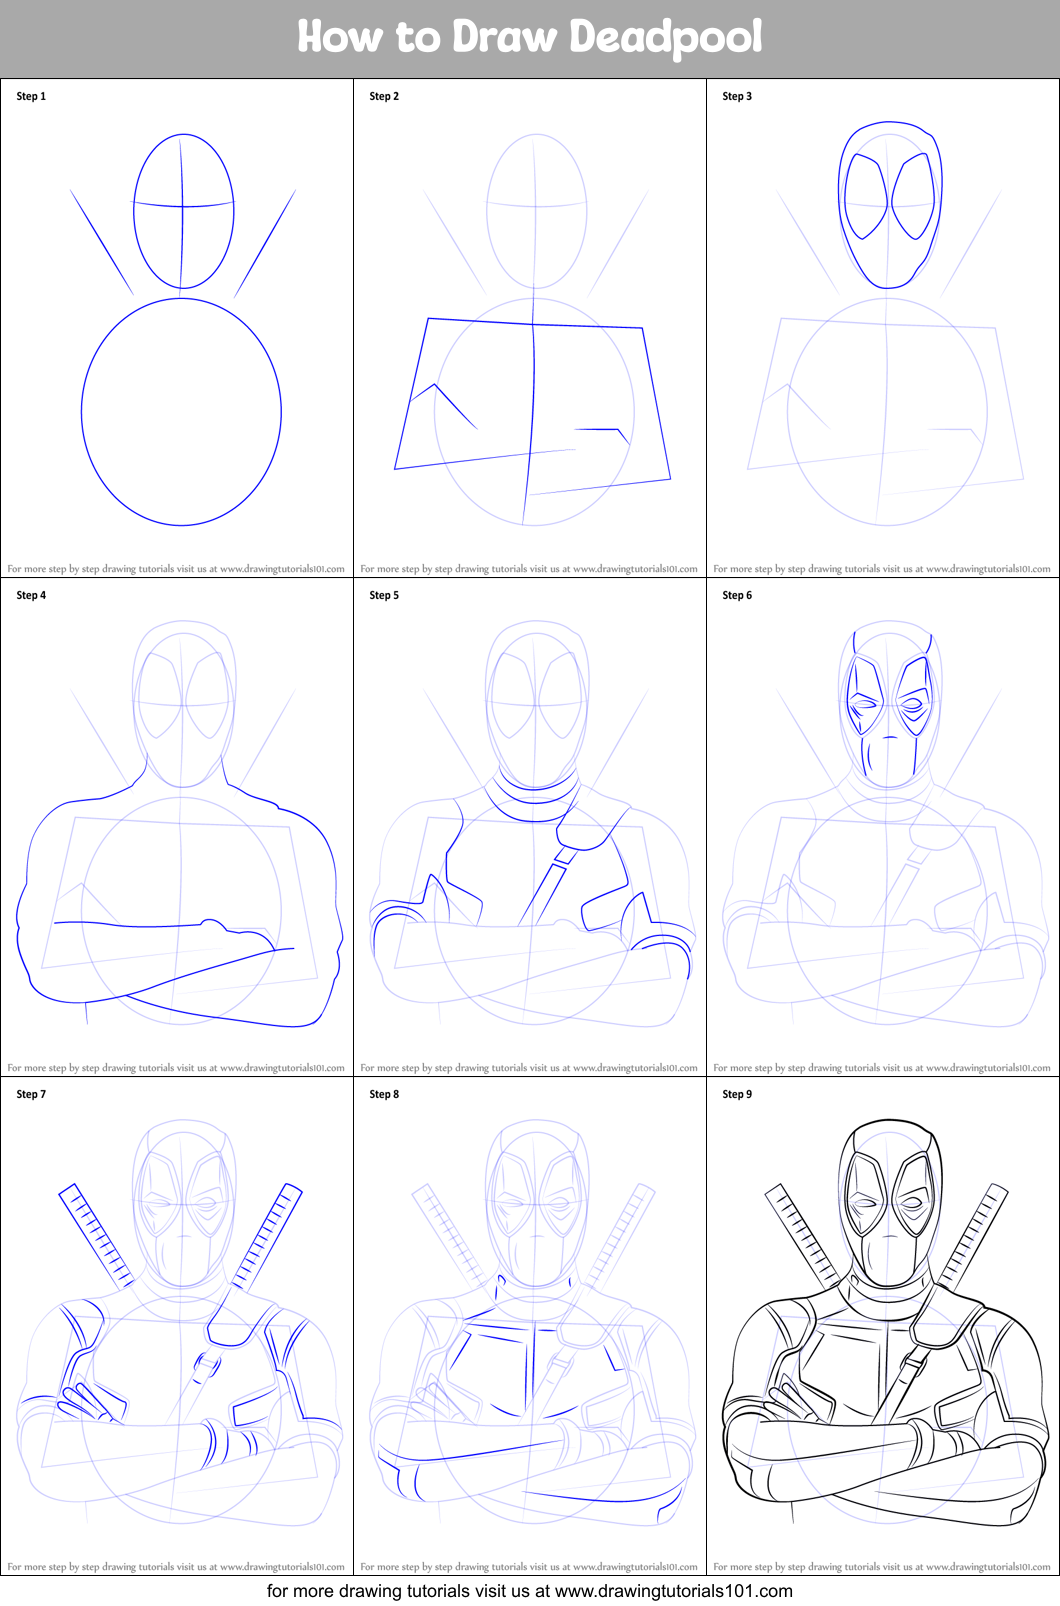 Easy Drawing Guides - Learn How to Draw Deadpool: Easy Step-by-Step Drawing  Tutorial for Kids and Beginners. #Deadpool #drawingtutorial #easydrawing.  See the full tutorial at http://bit.ly/2OVgIDv . | Facebook